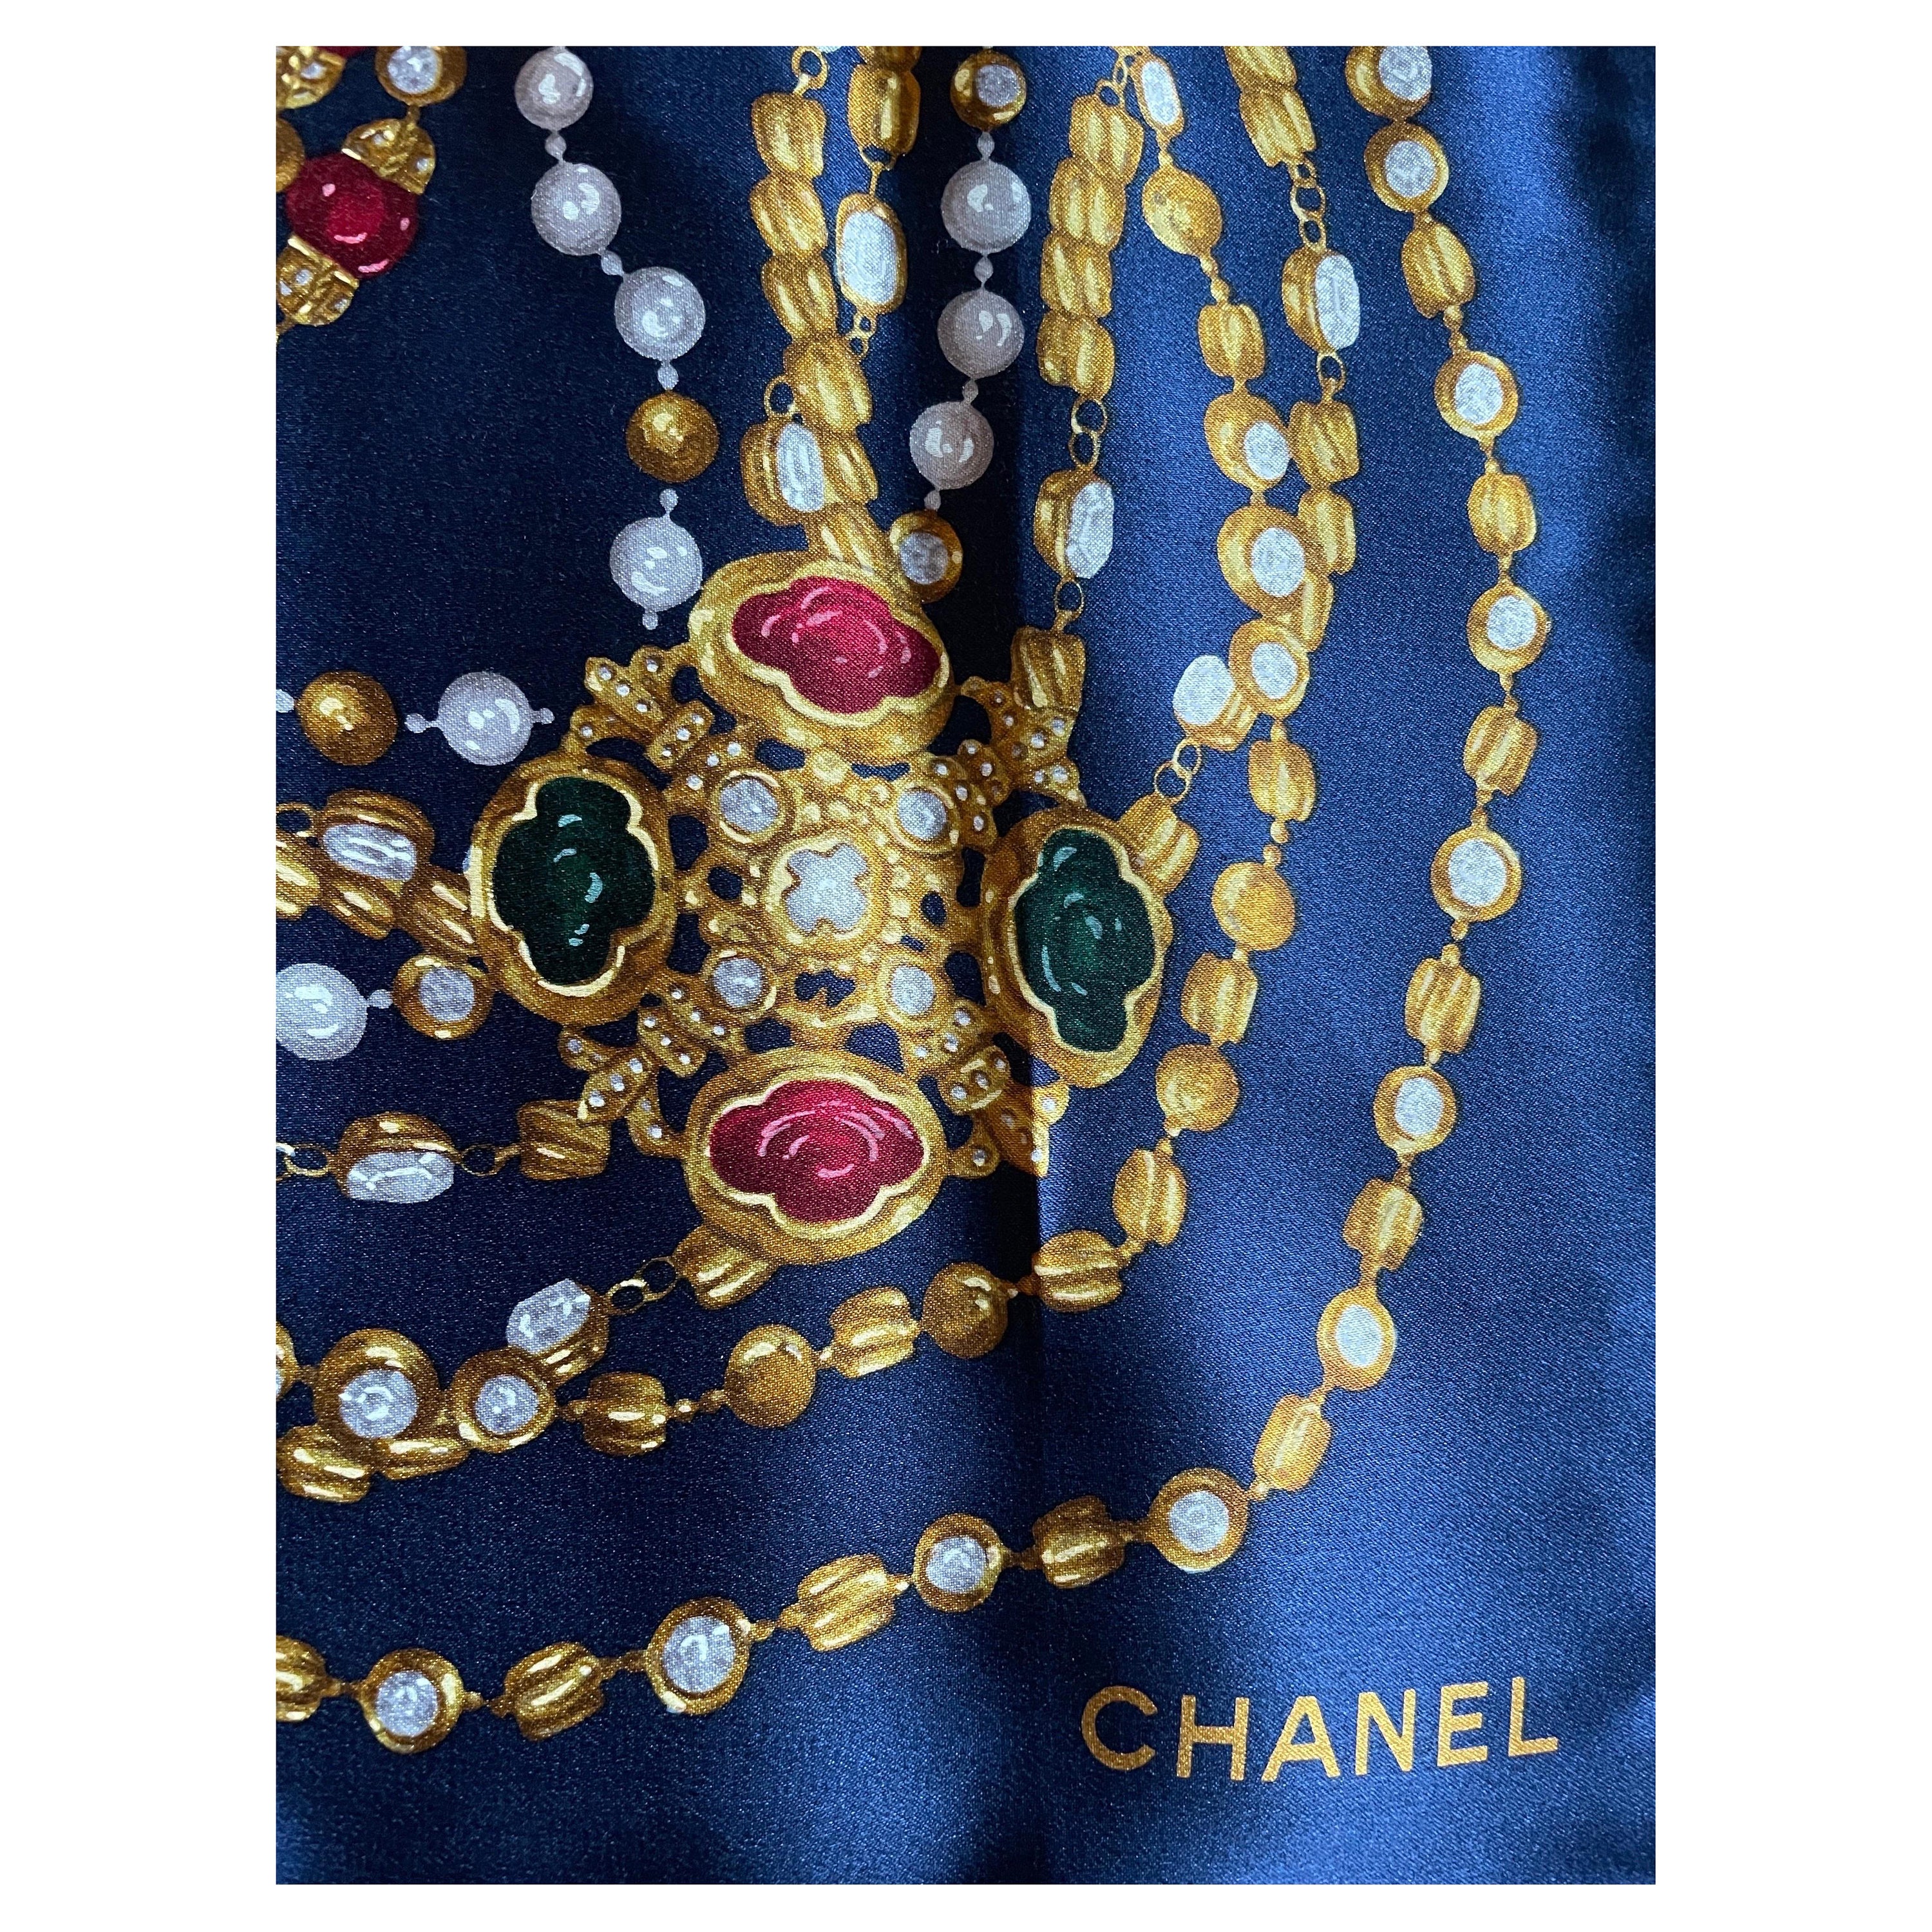 Merci darling  Chanel Vintage Scarf 2000 Check out my product  httpswwwmercidarlingcomproductpagechanelscarf1  Facebook